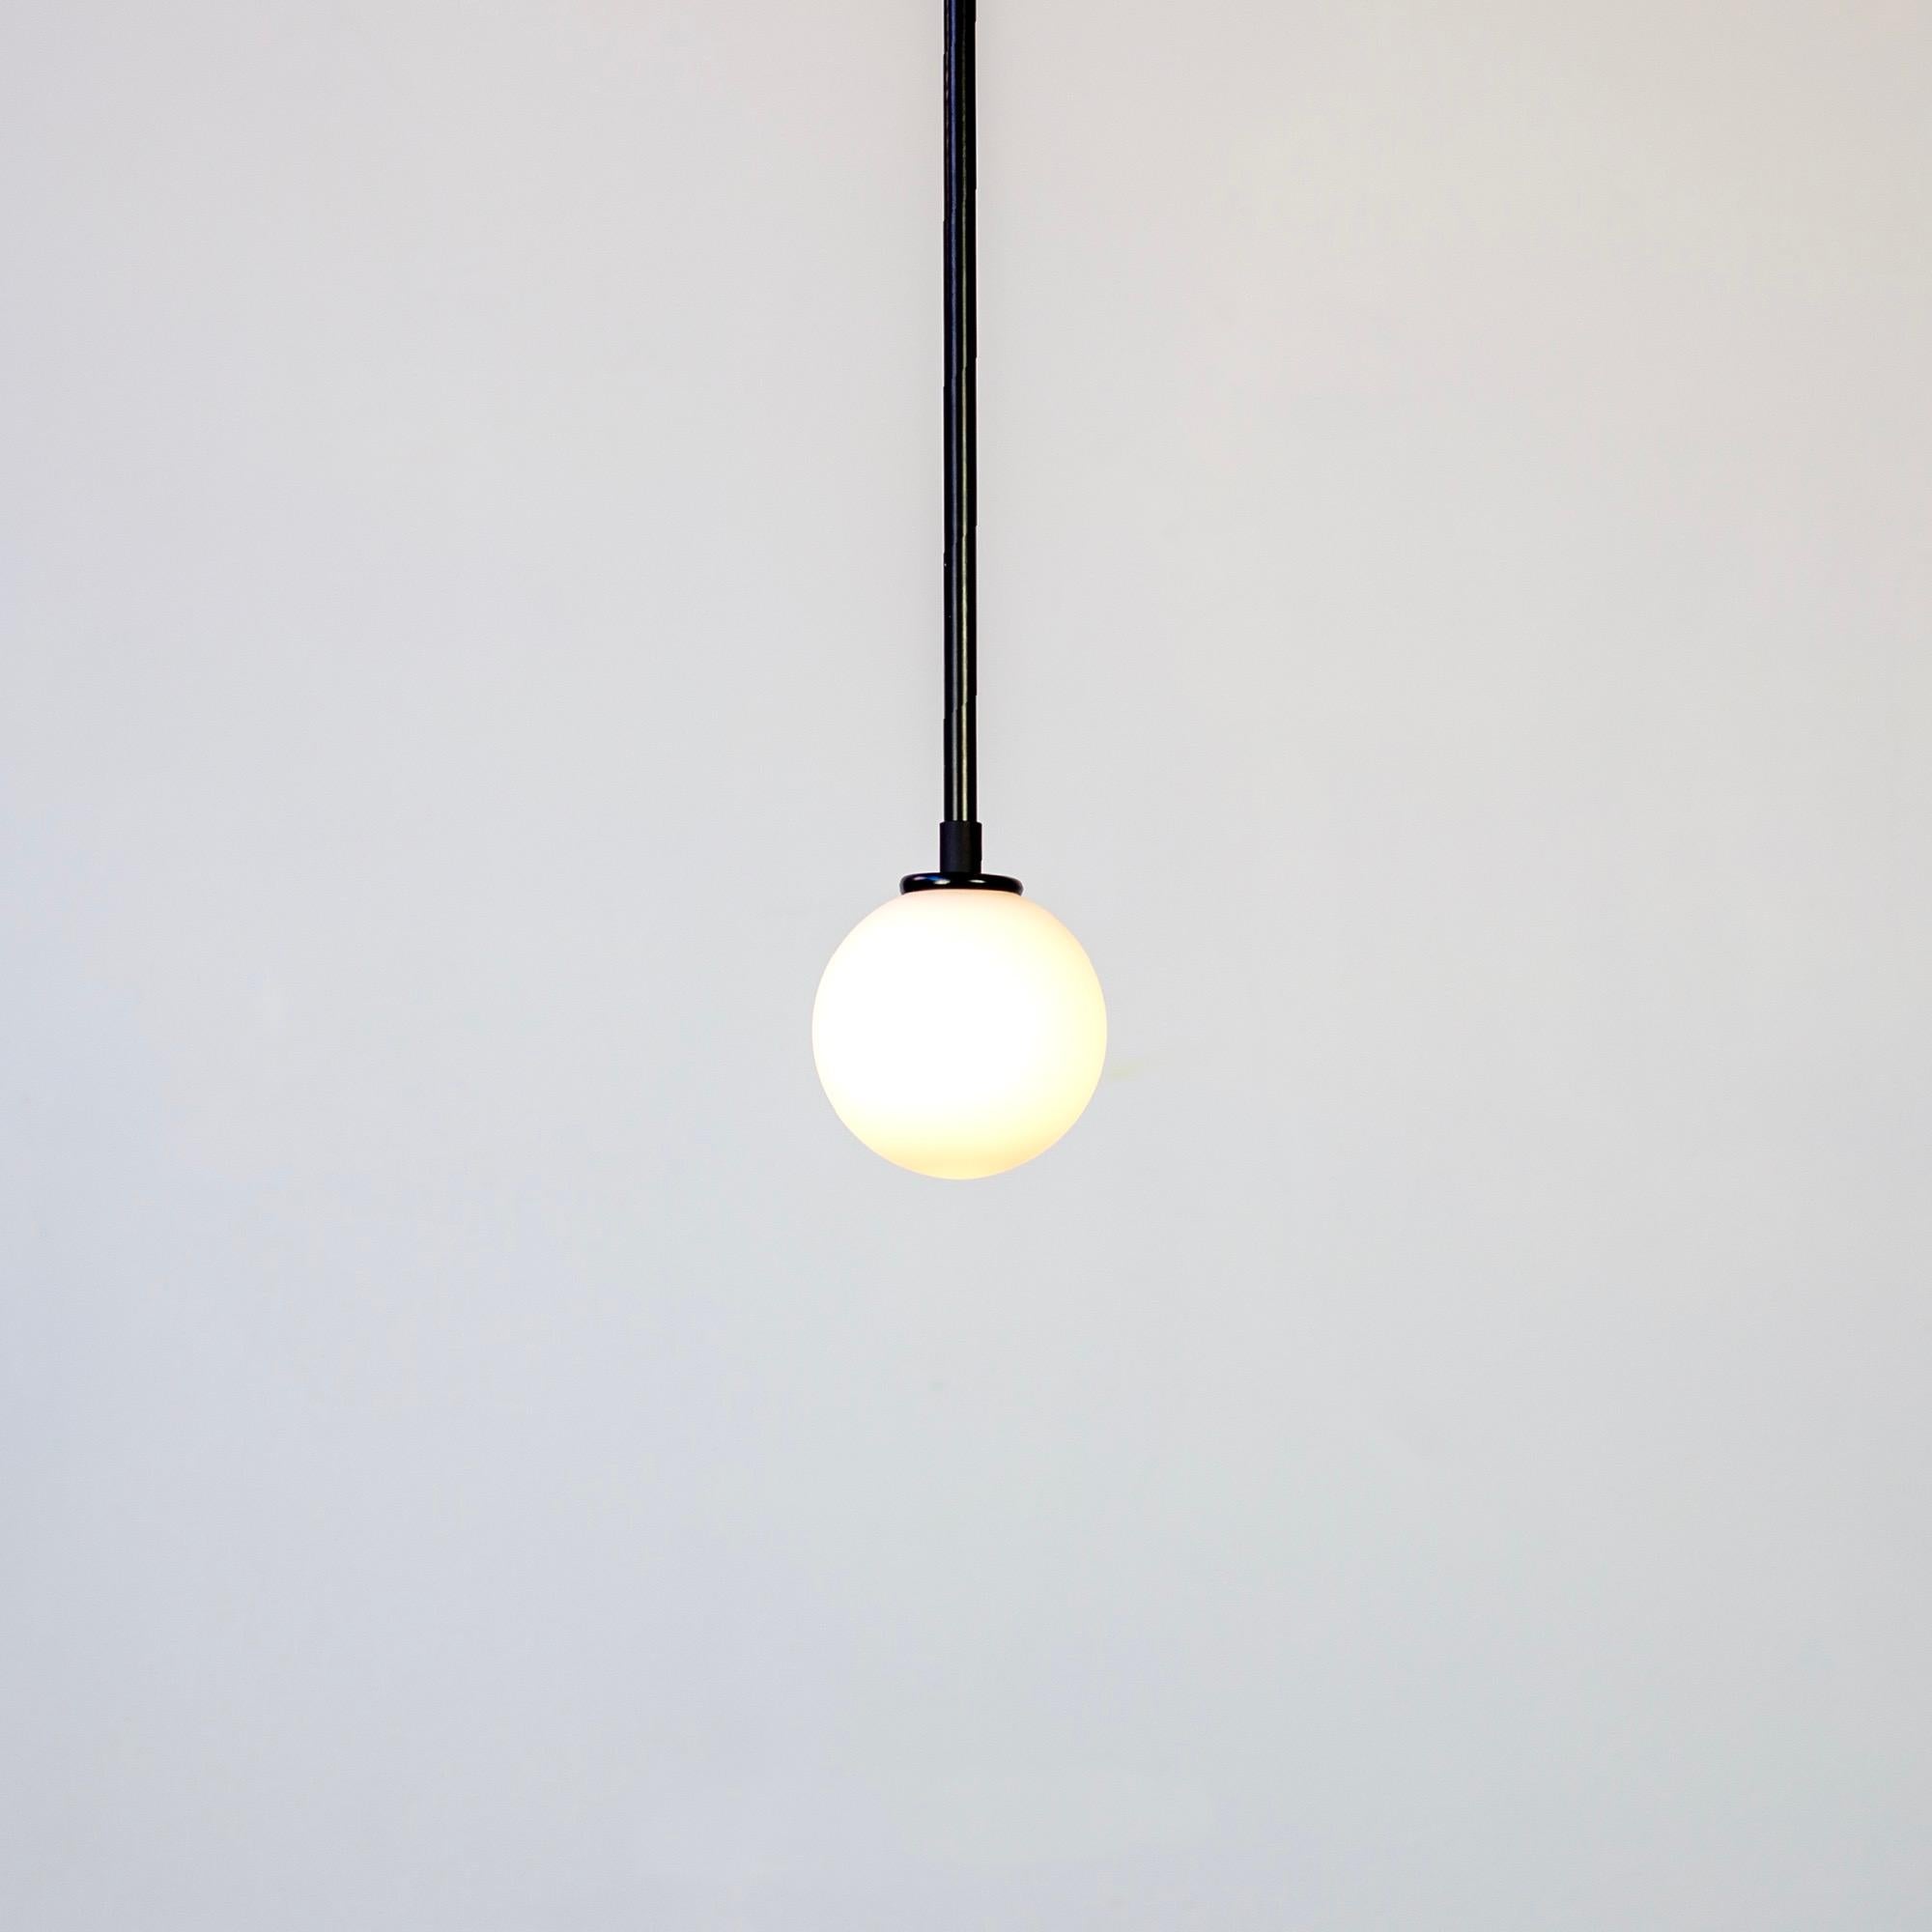 This listing is for 1x Ball Pendant in Black designed and manufactured by RESEARCH Lighting.

Materials: Steel & Glass
Finish: Powder Coated Steel in black
Electronics: 1x G9 Socket, 4.5 Watt LED Bulb (included), 450 Lumens
Suspension: 5